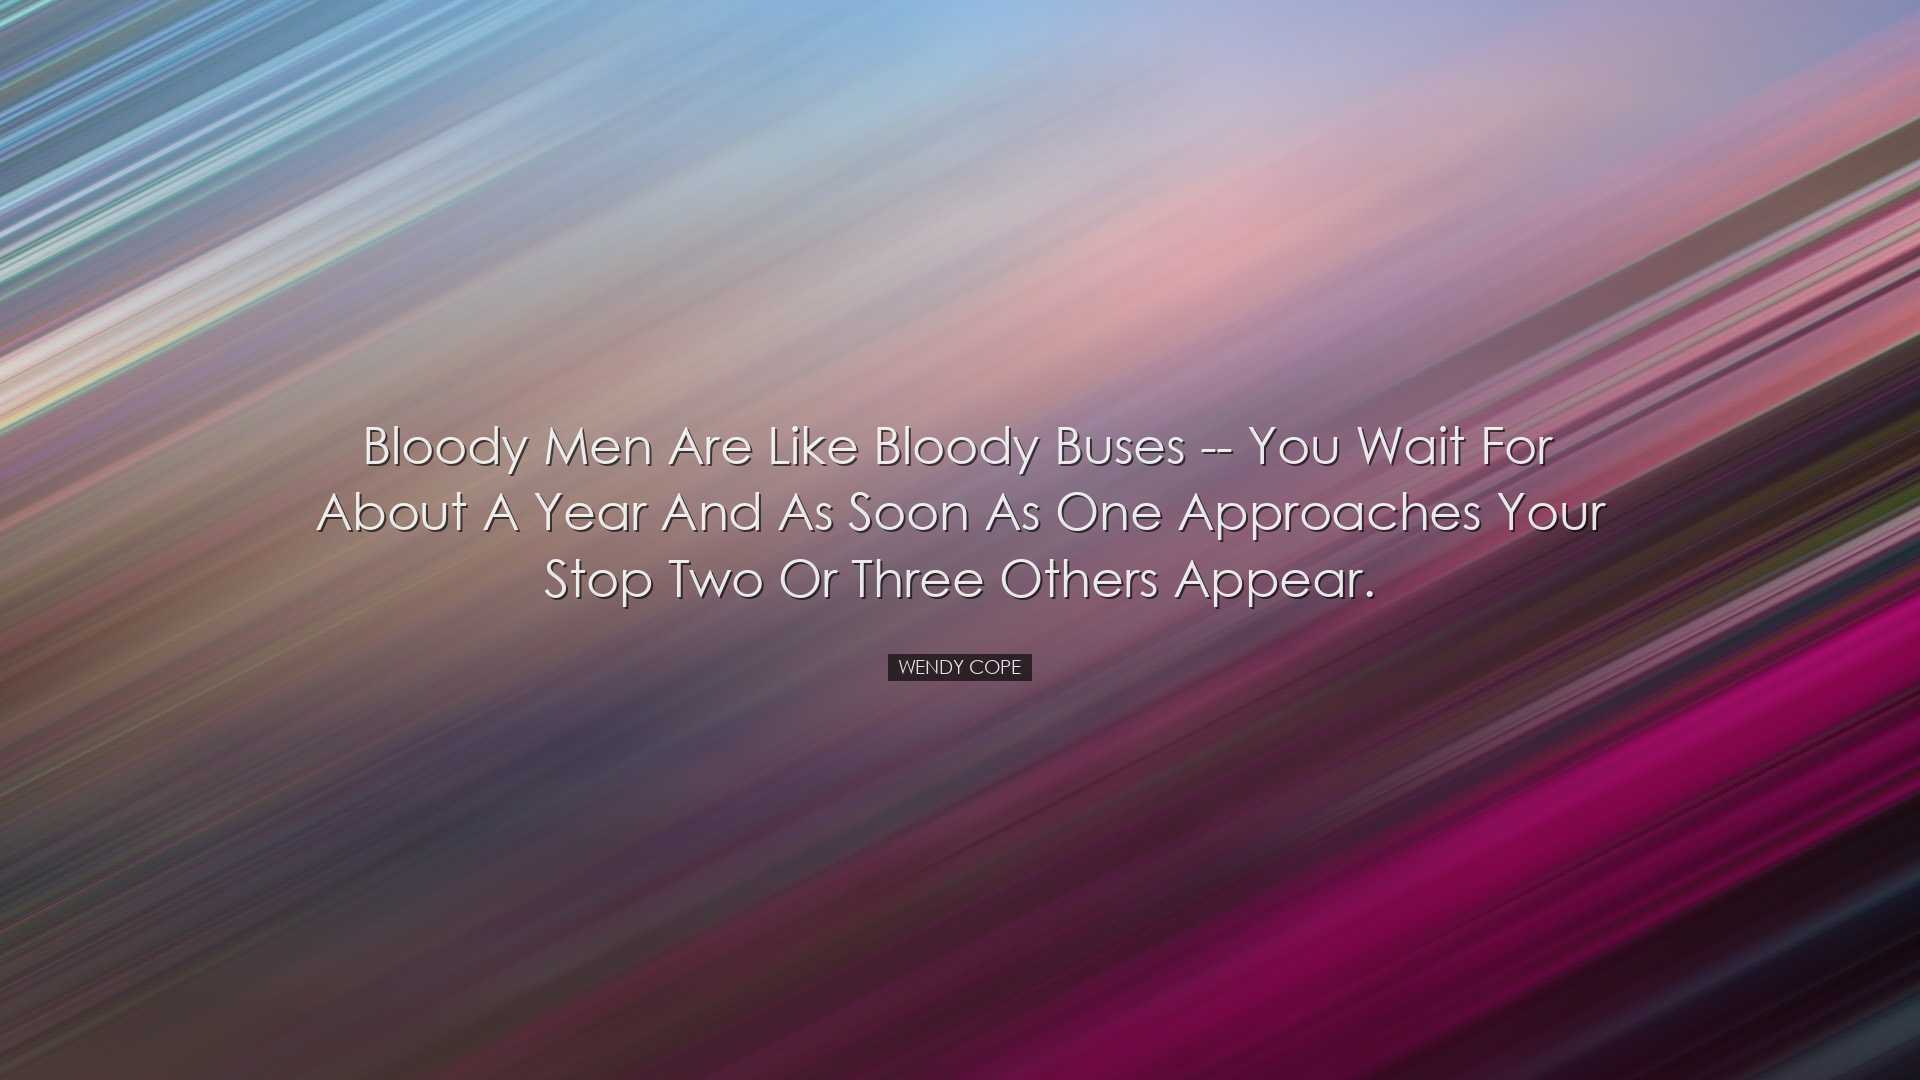 Bloody men are like bloody buses -- you wait for about a year and